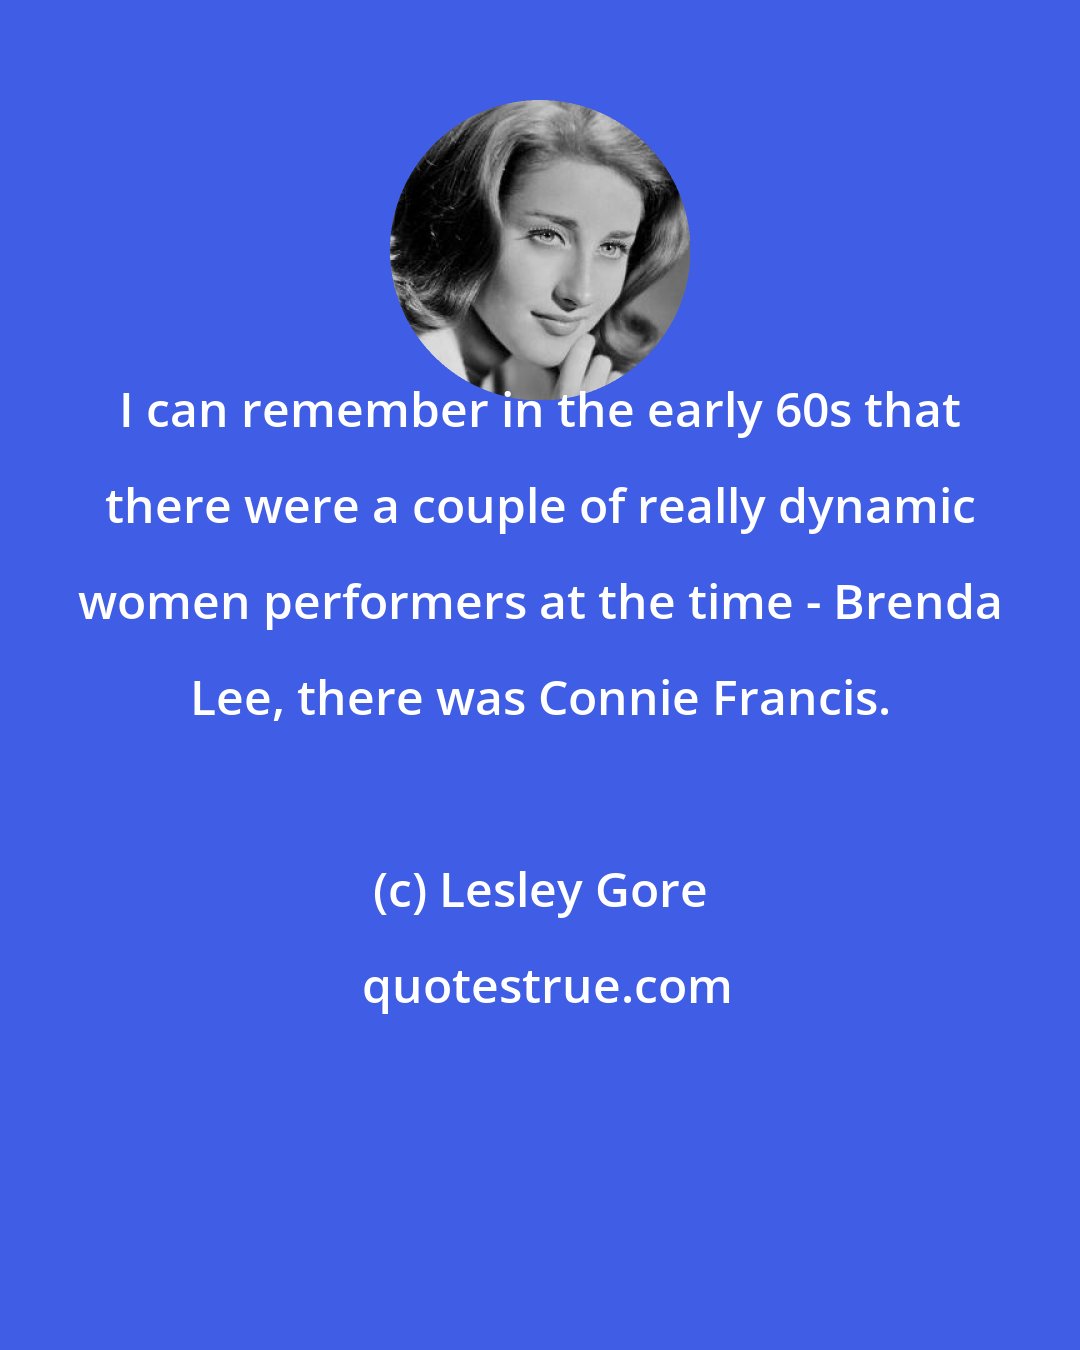 Lesley Gore: I can remember in the early 60s that there were a couple of really dynamic women performers at the time - Brenda Lee, there was Connie Francis.